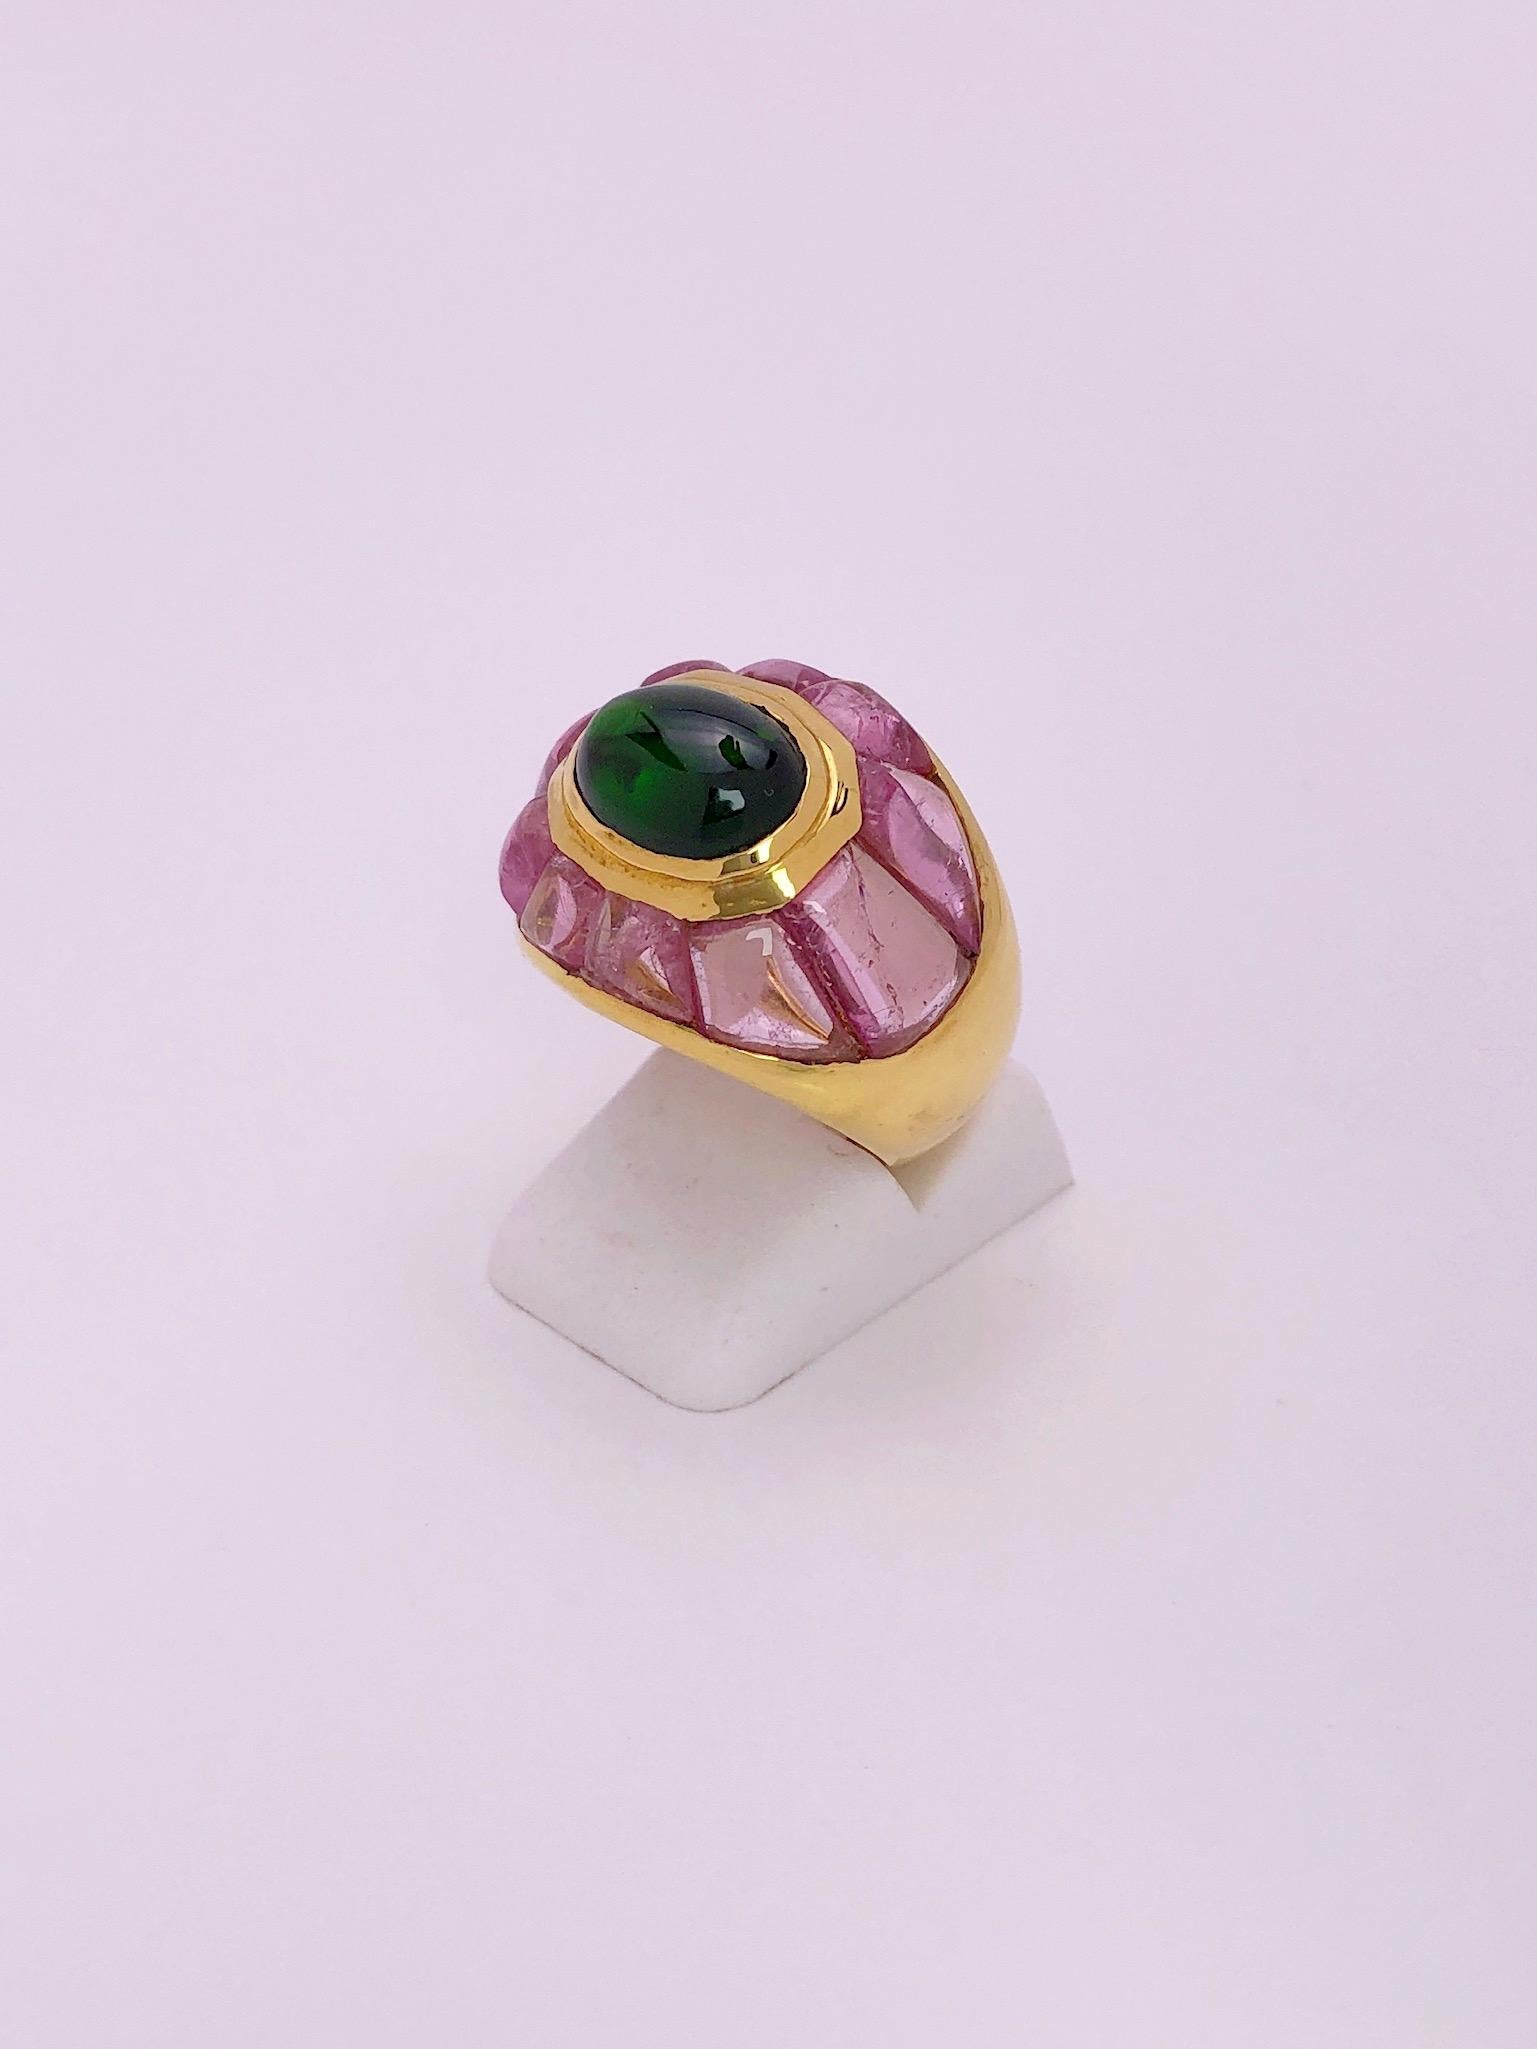 This 18 karat yellow gold ring crafted by Roberto Legnazzi, centers an oval cabochon  green tourmaline. Its skirted border is set with a fancy cut pink tourmaline entourage.
Stamped Italy 18kt
Ring size 6.5  
Sizing options available